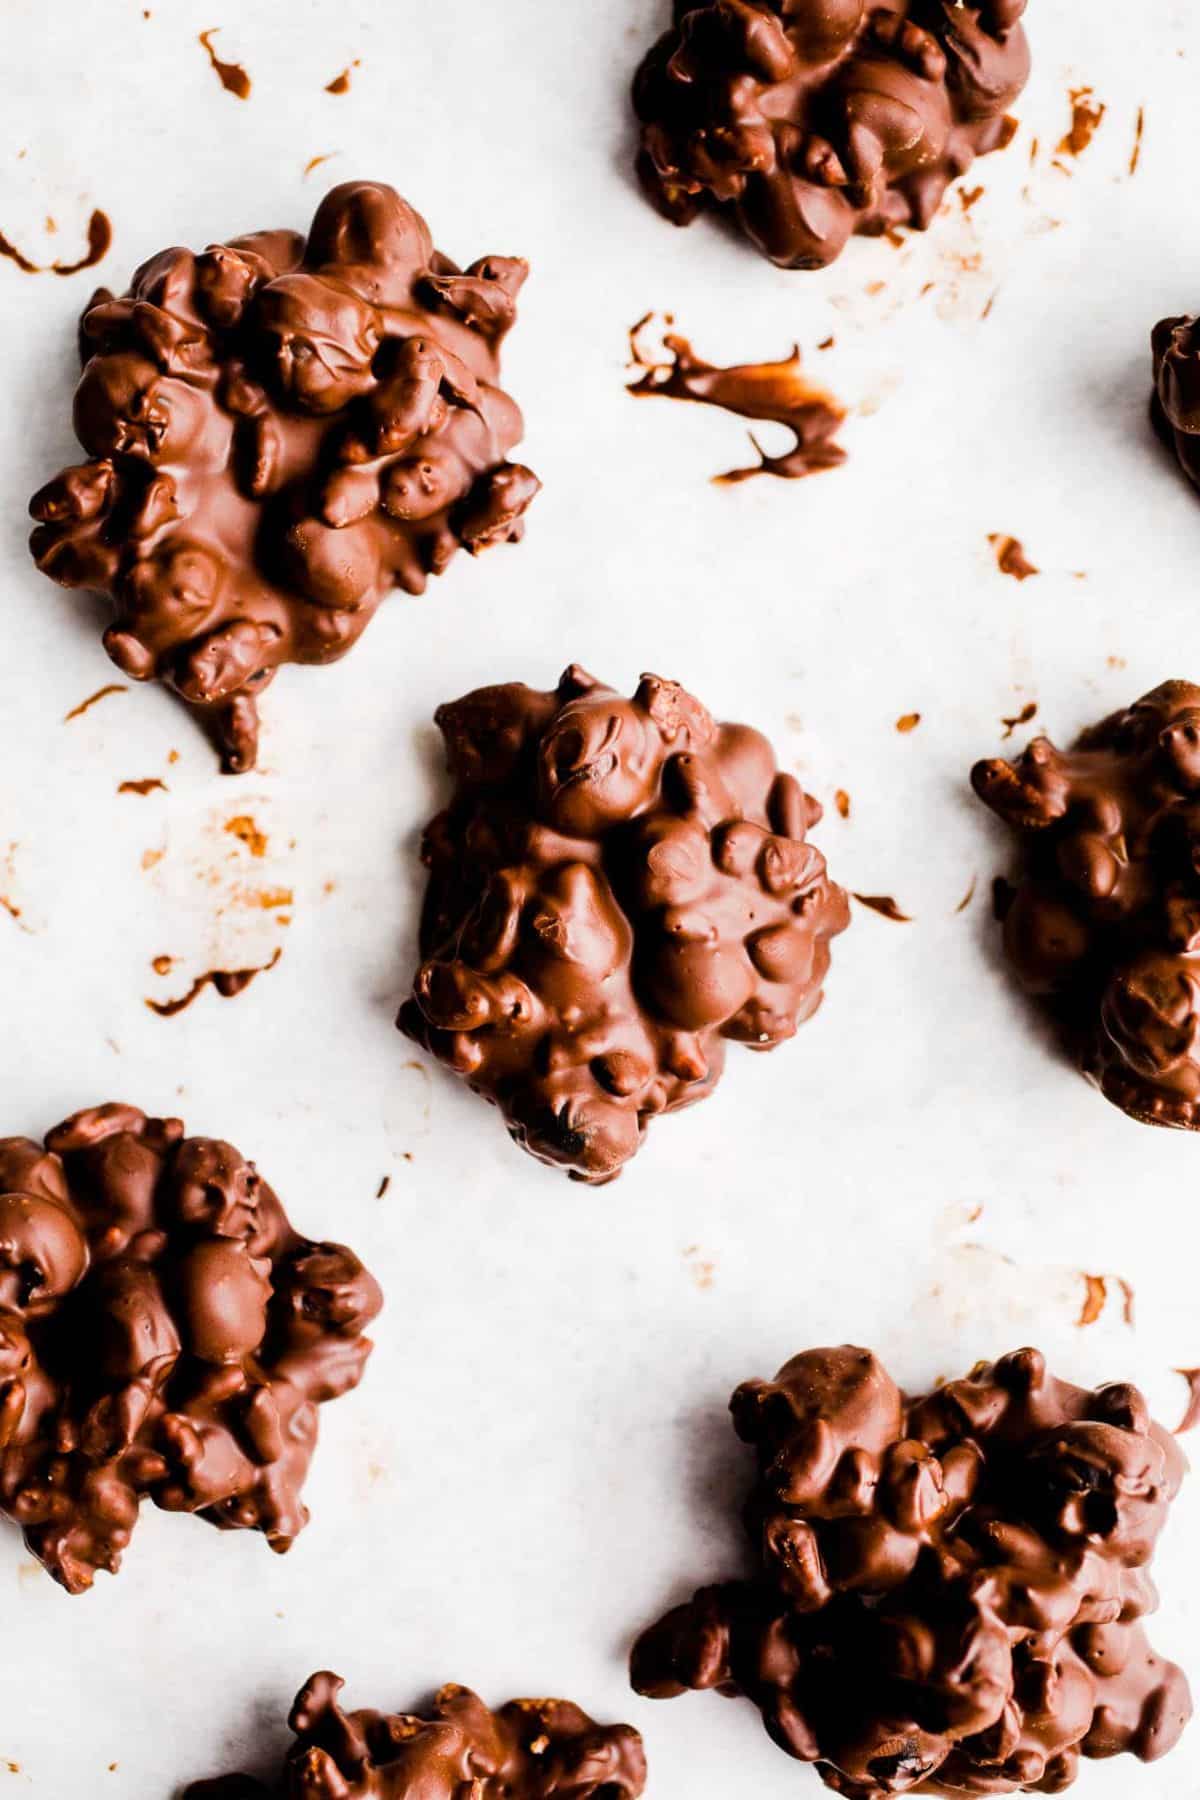 Scrumptious Chocolate-Covered Blueberry Clusters.